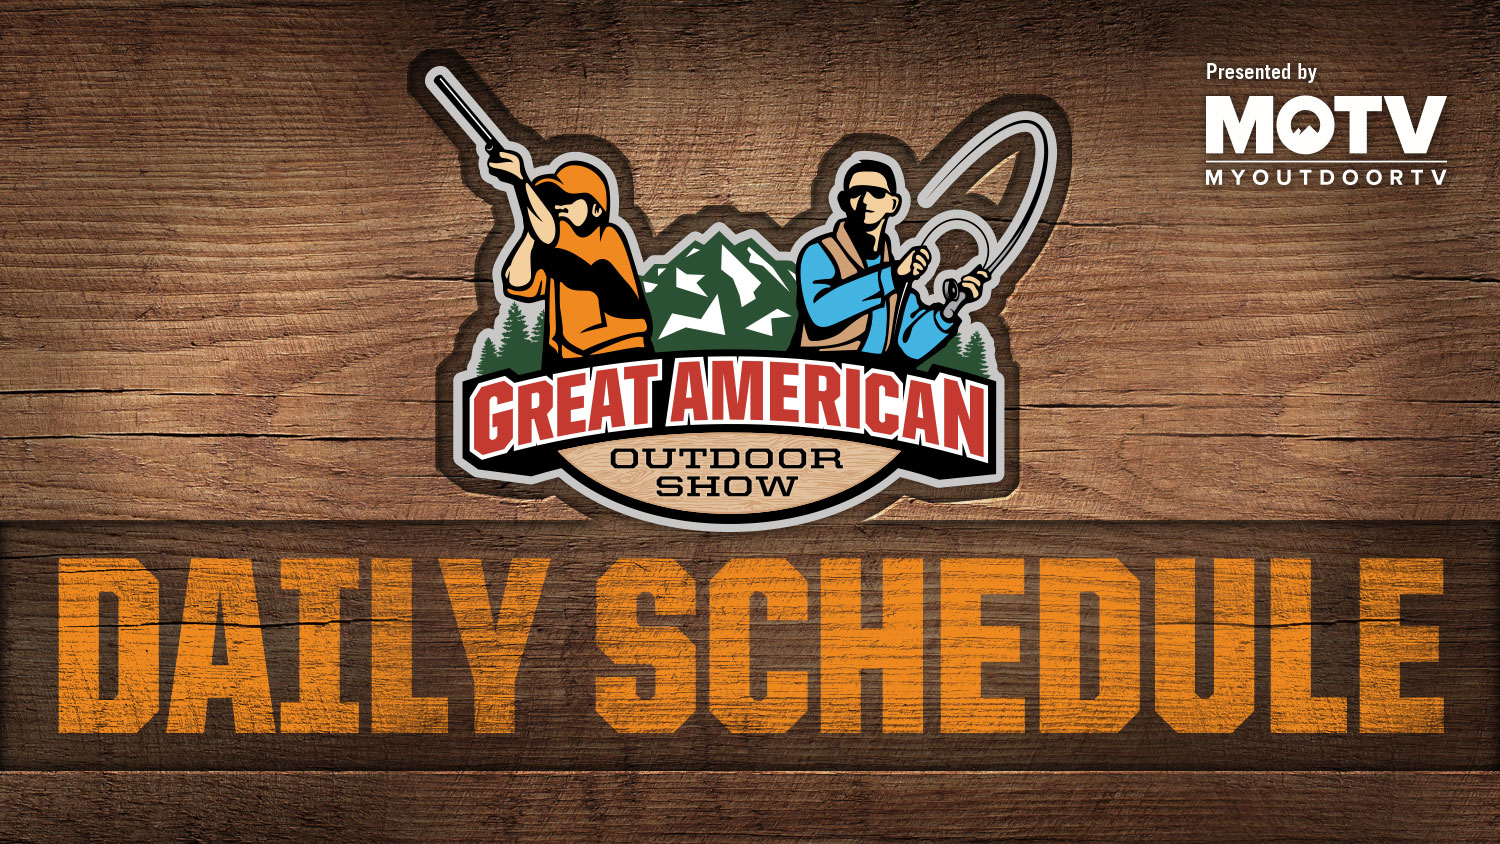 Great American Outdoor Show: Day 7 Schedule 